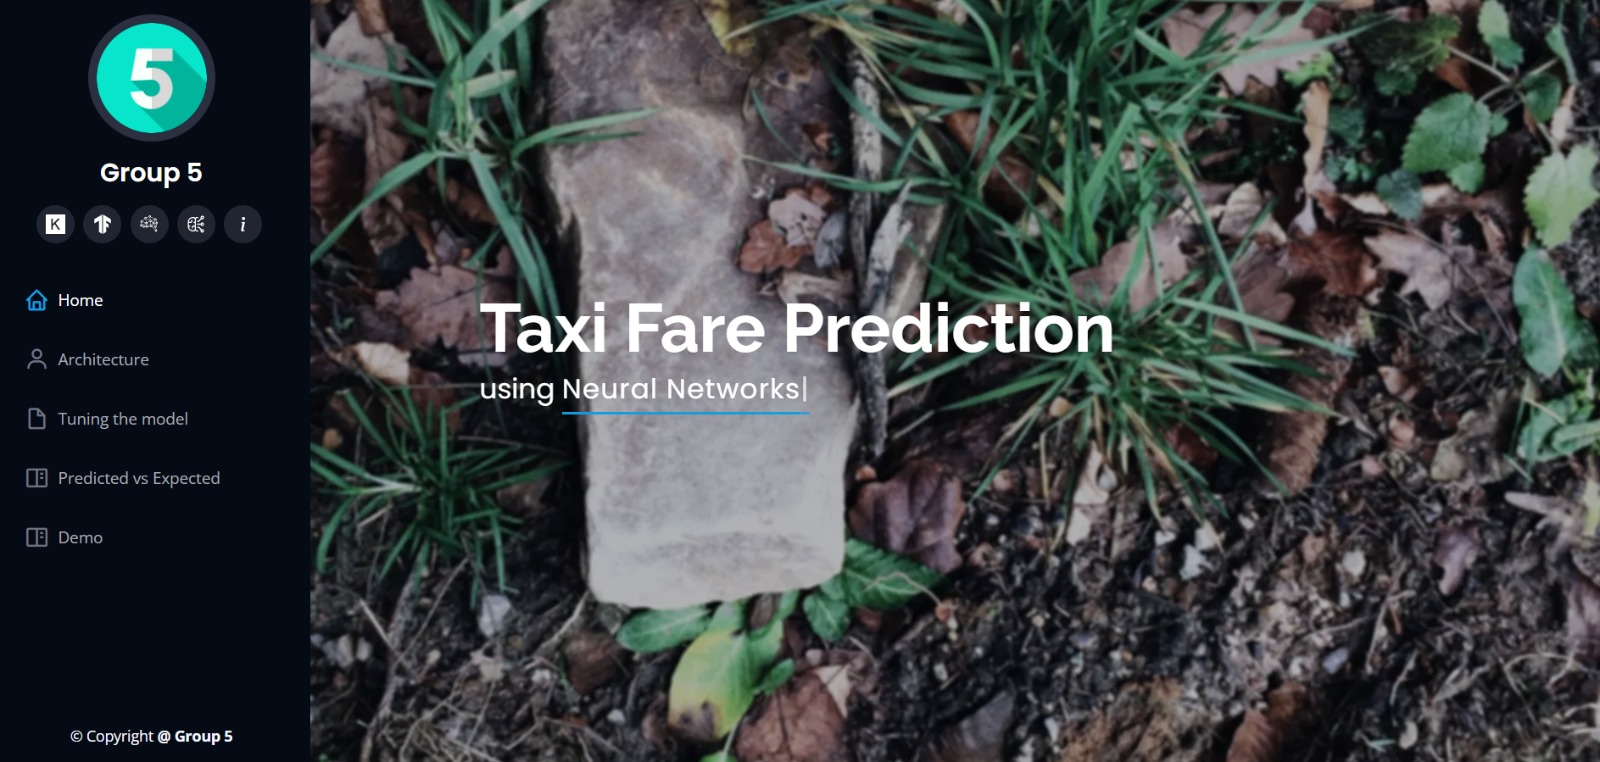 Taxi Fare Prediction using Deep Learning